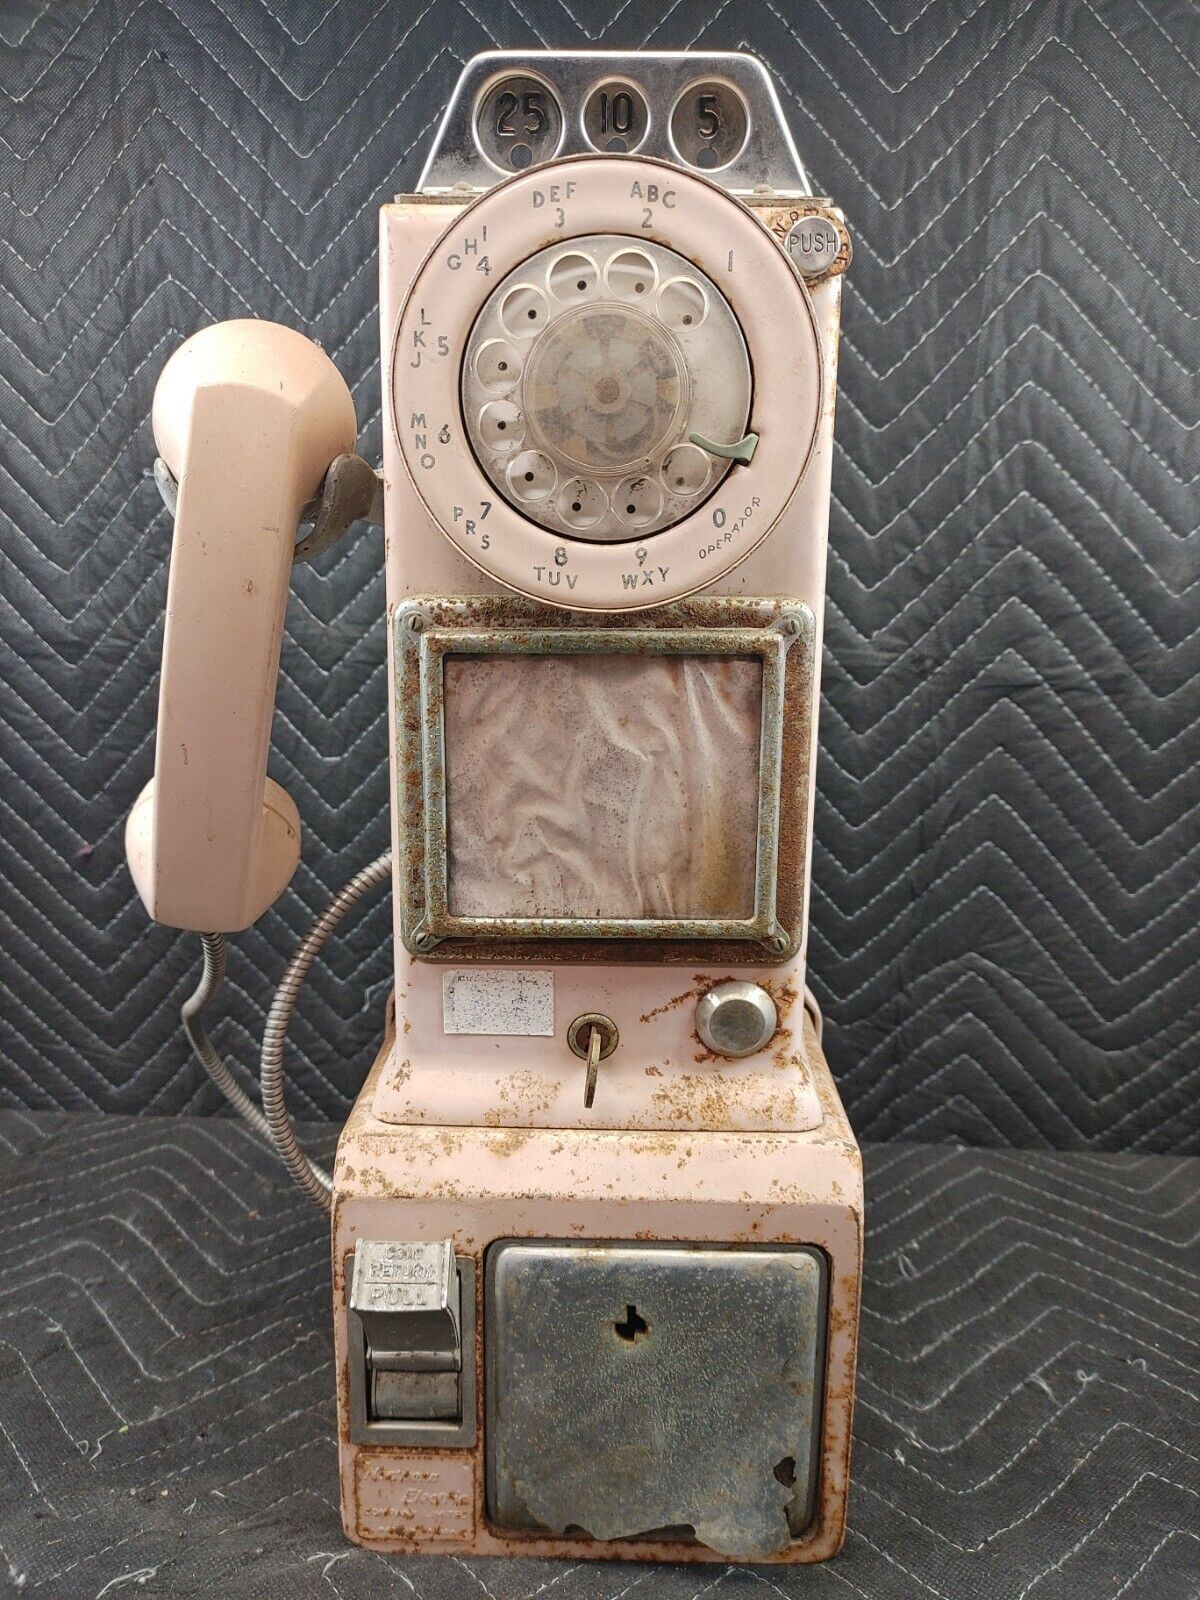 Vintage 3 Slot Rotary Northern Electric Payphone 1969 w/ key